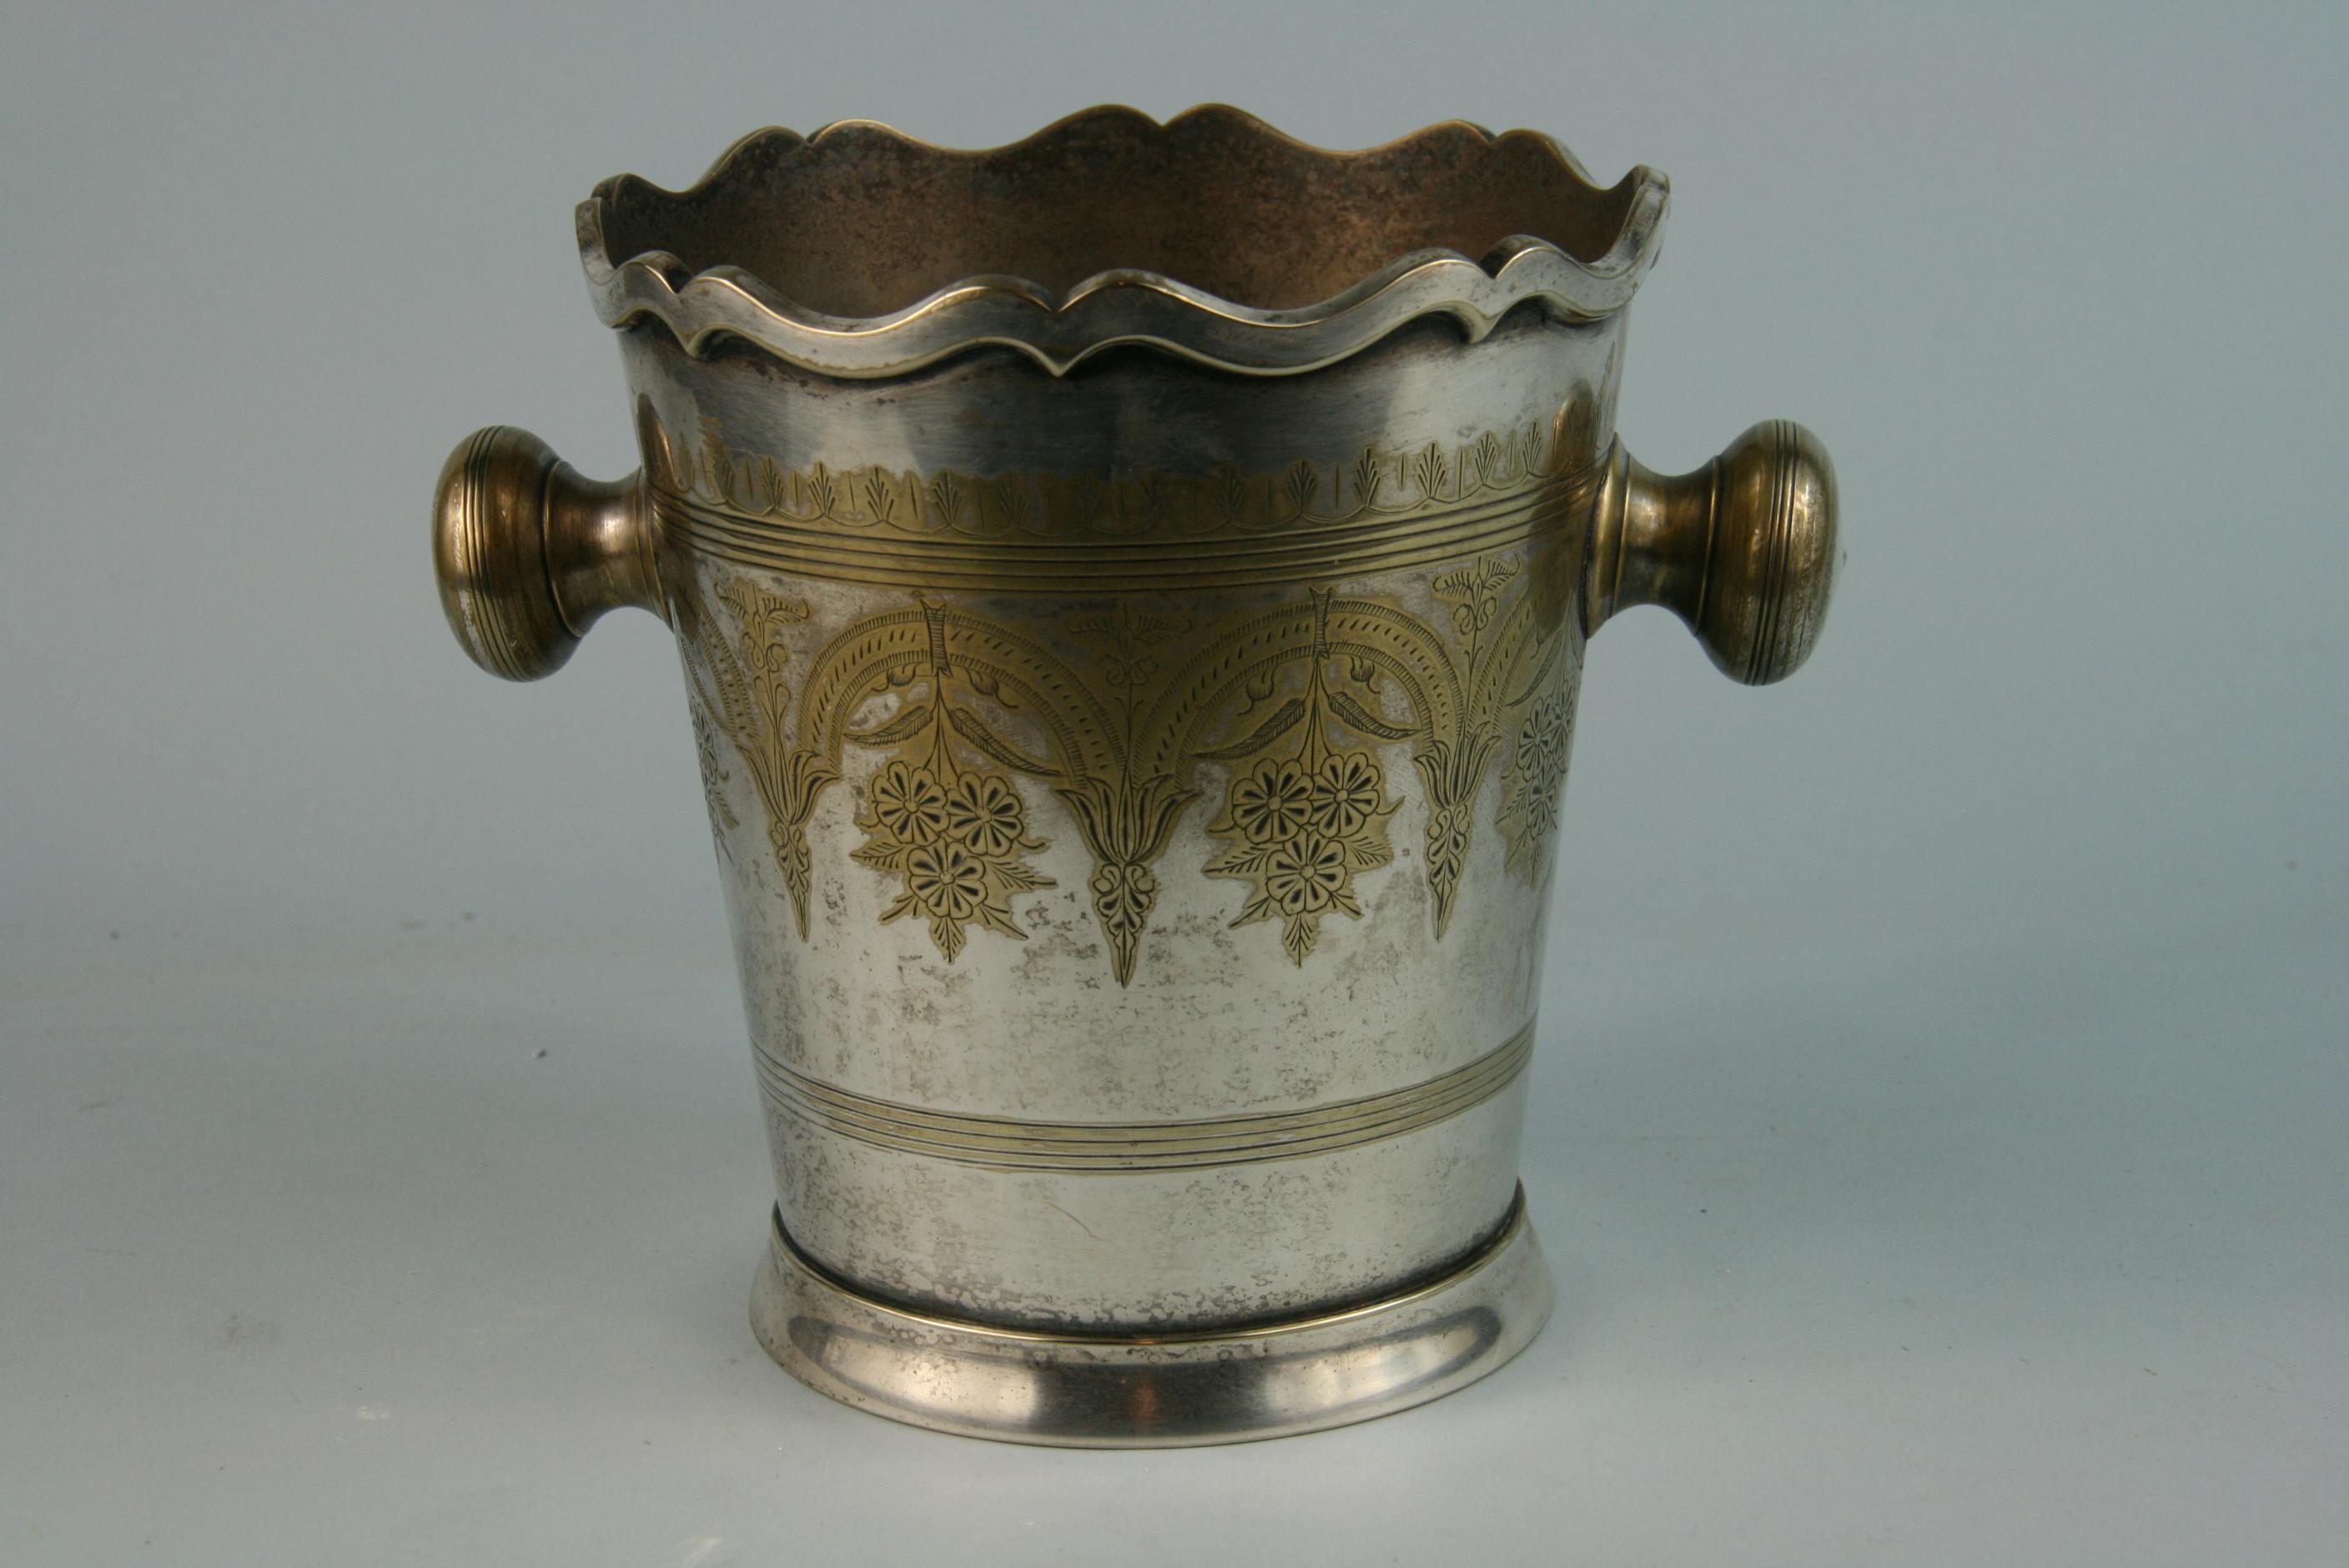 3-537 Silvered brass wine cooler/ice bucket with repousse detailing and ball handles
Marked Leonard on Bottom with makers marks.